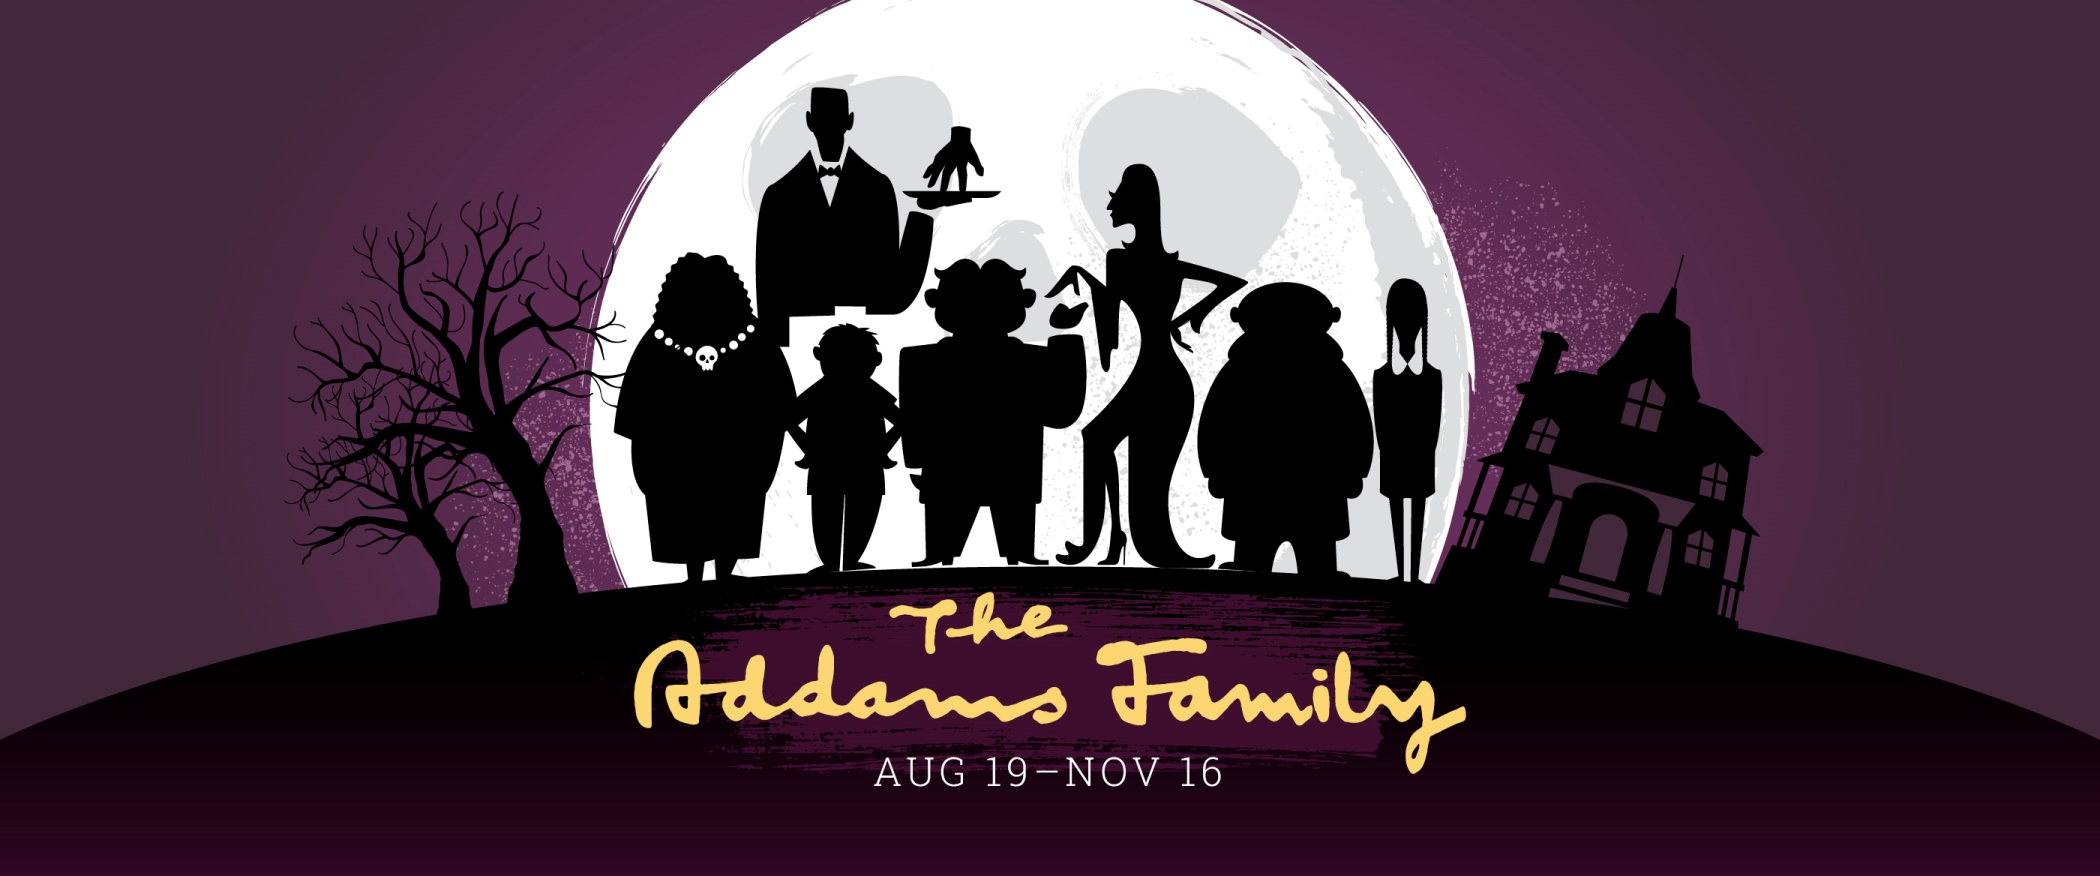 The Addams Family, playing August 10 - November 16 on the Sorenson Legacy Jewel Box